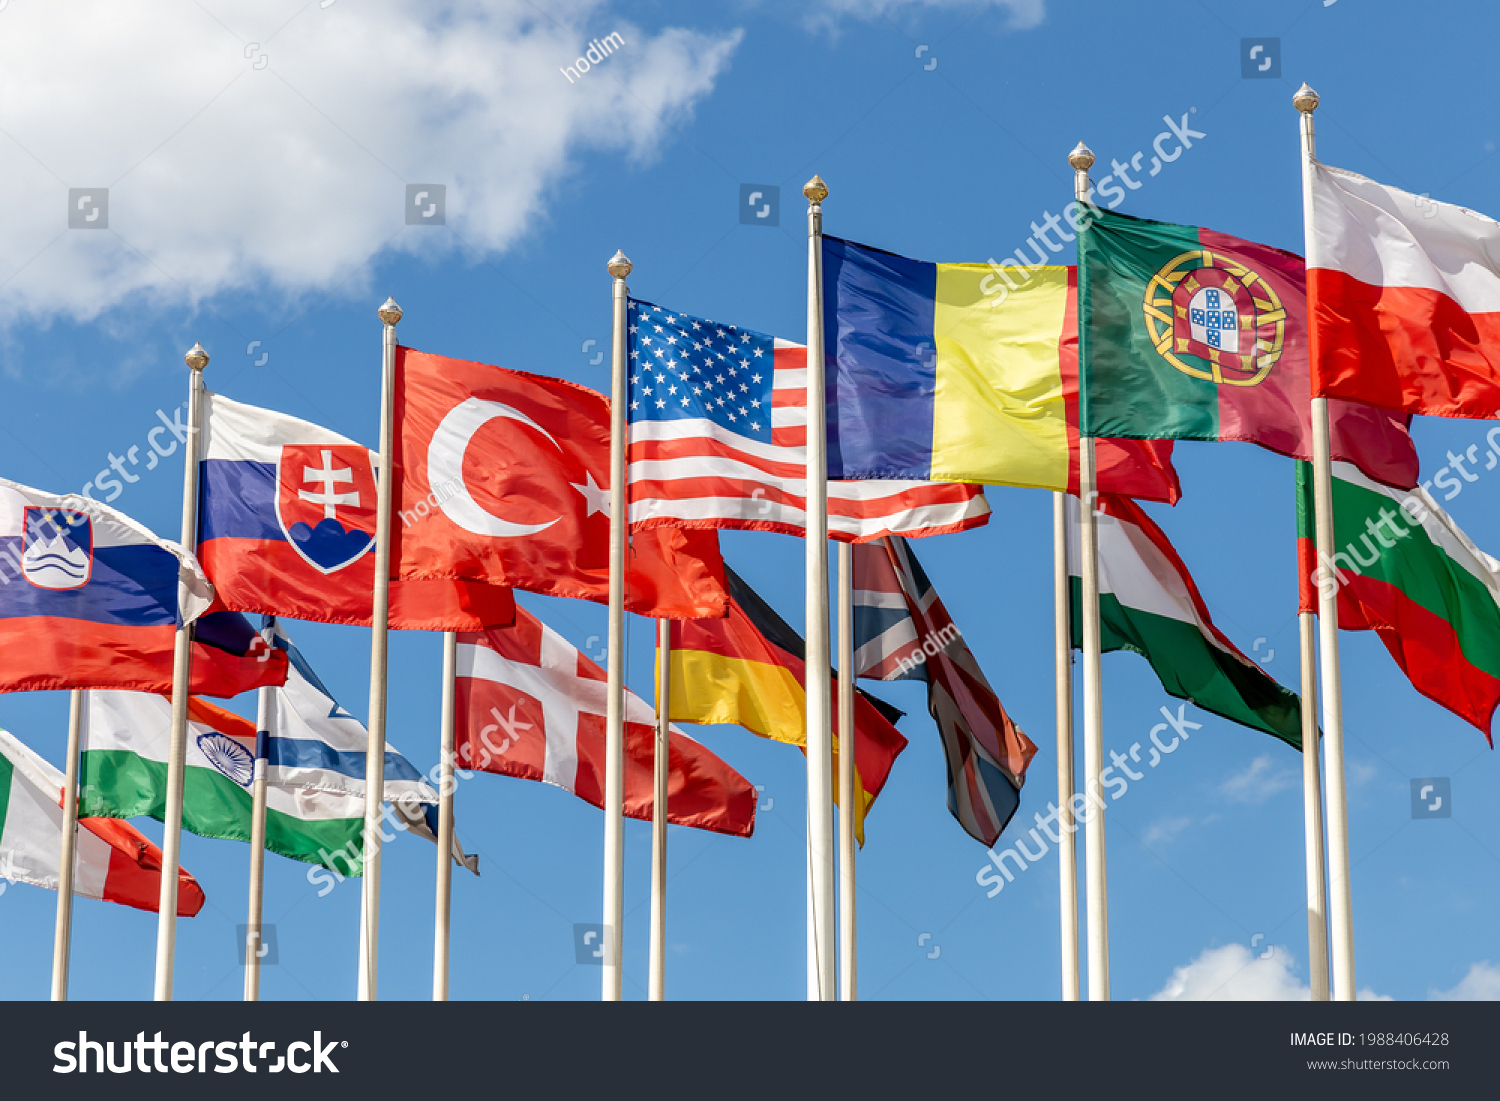 Group of flags of various states - as a symbol of world cooperation. Flags of the countries of the world on flagpoles flutter in the wind against the background of a blue sky #1988406428